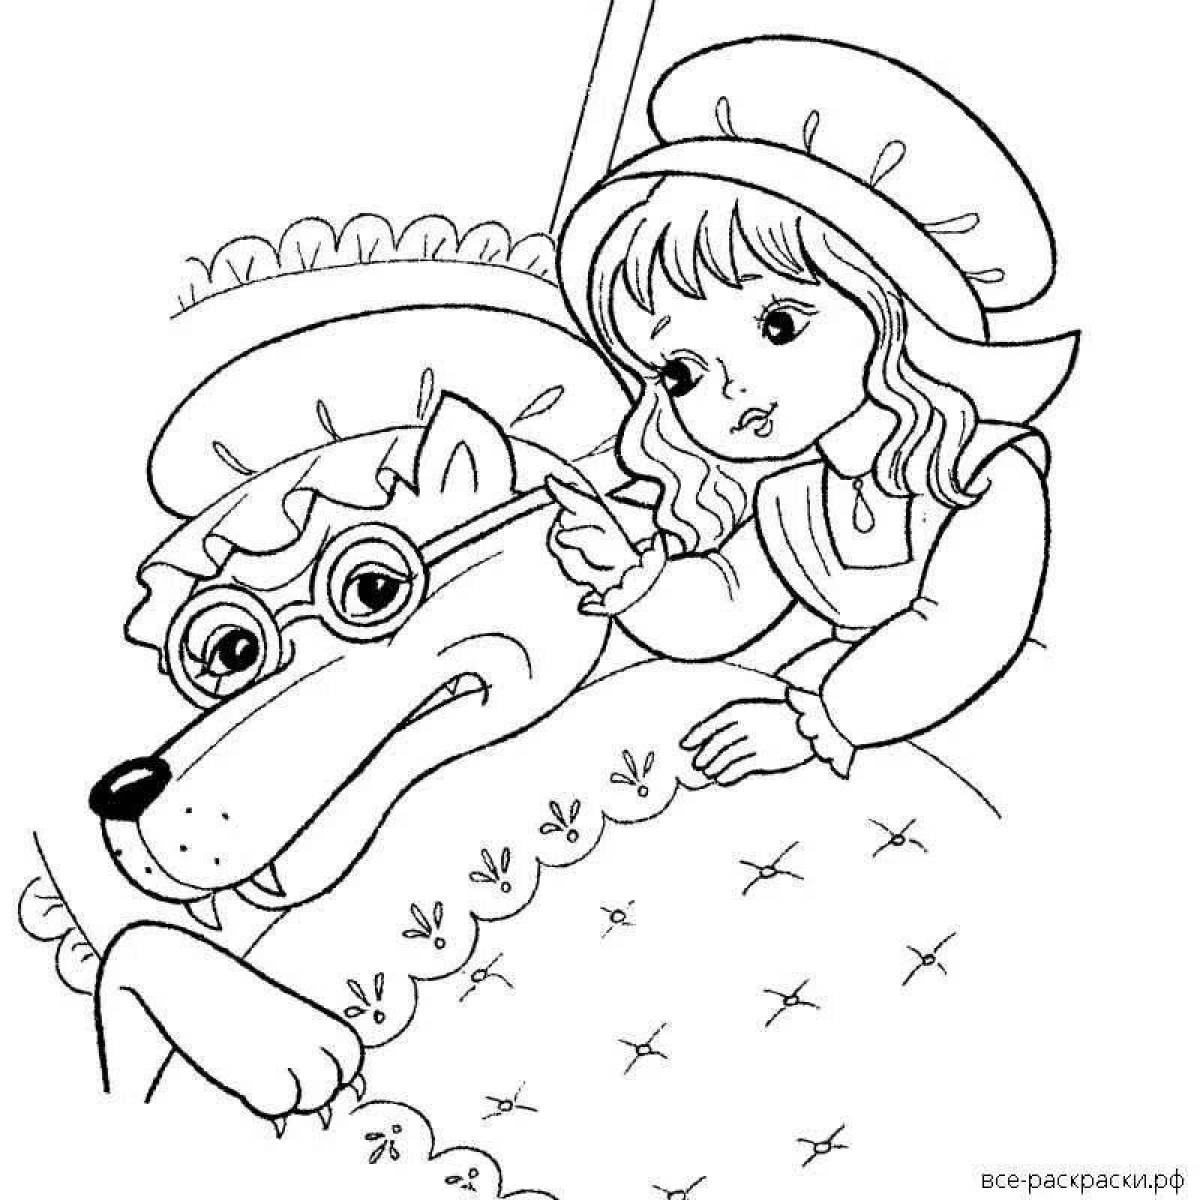 Gorgeous charles perrault little red riding hood coloring book